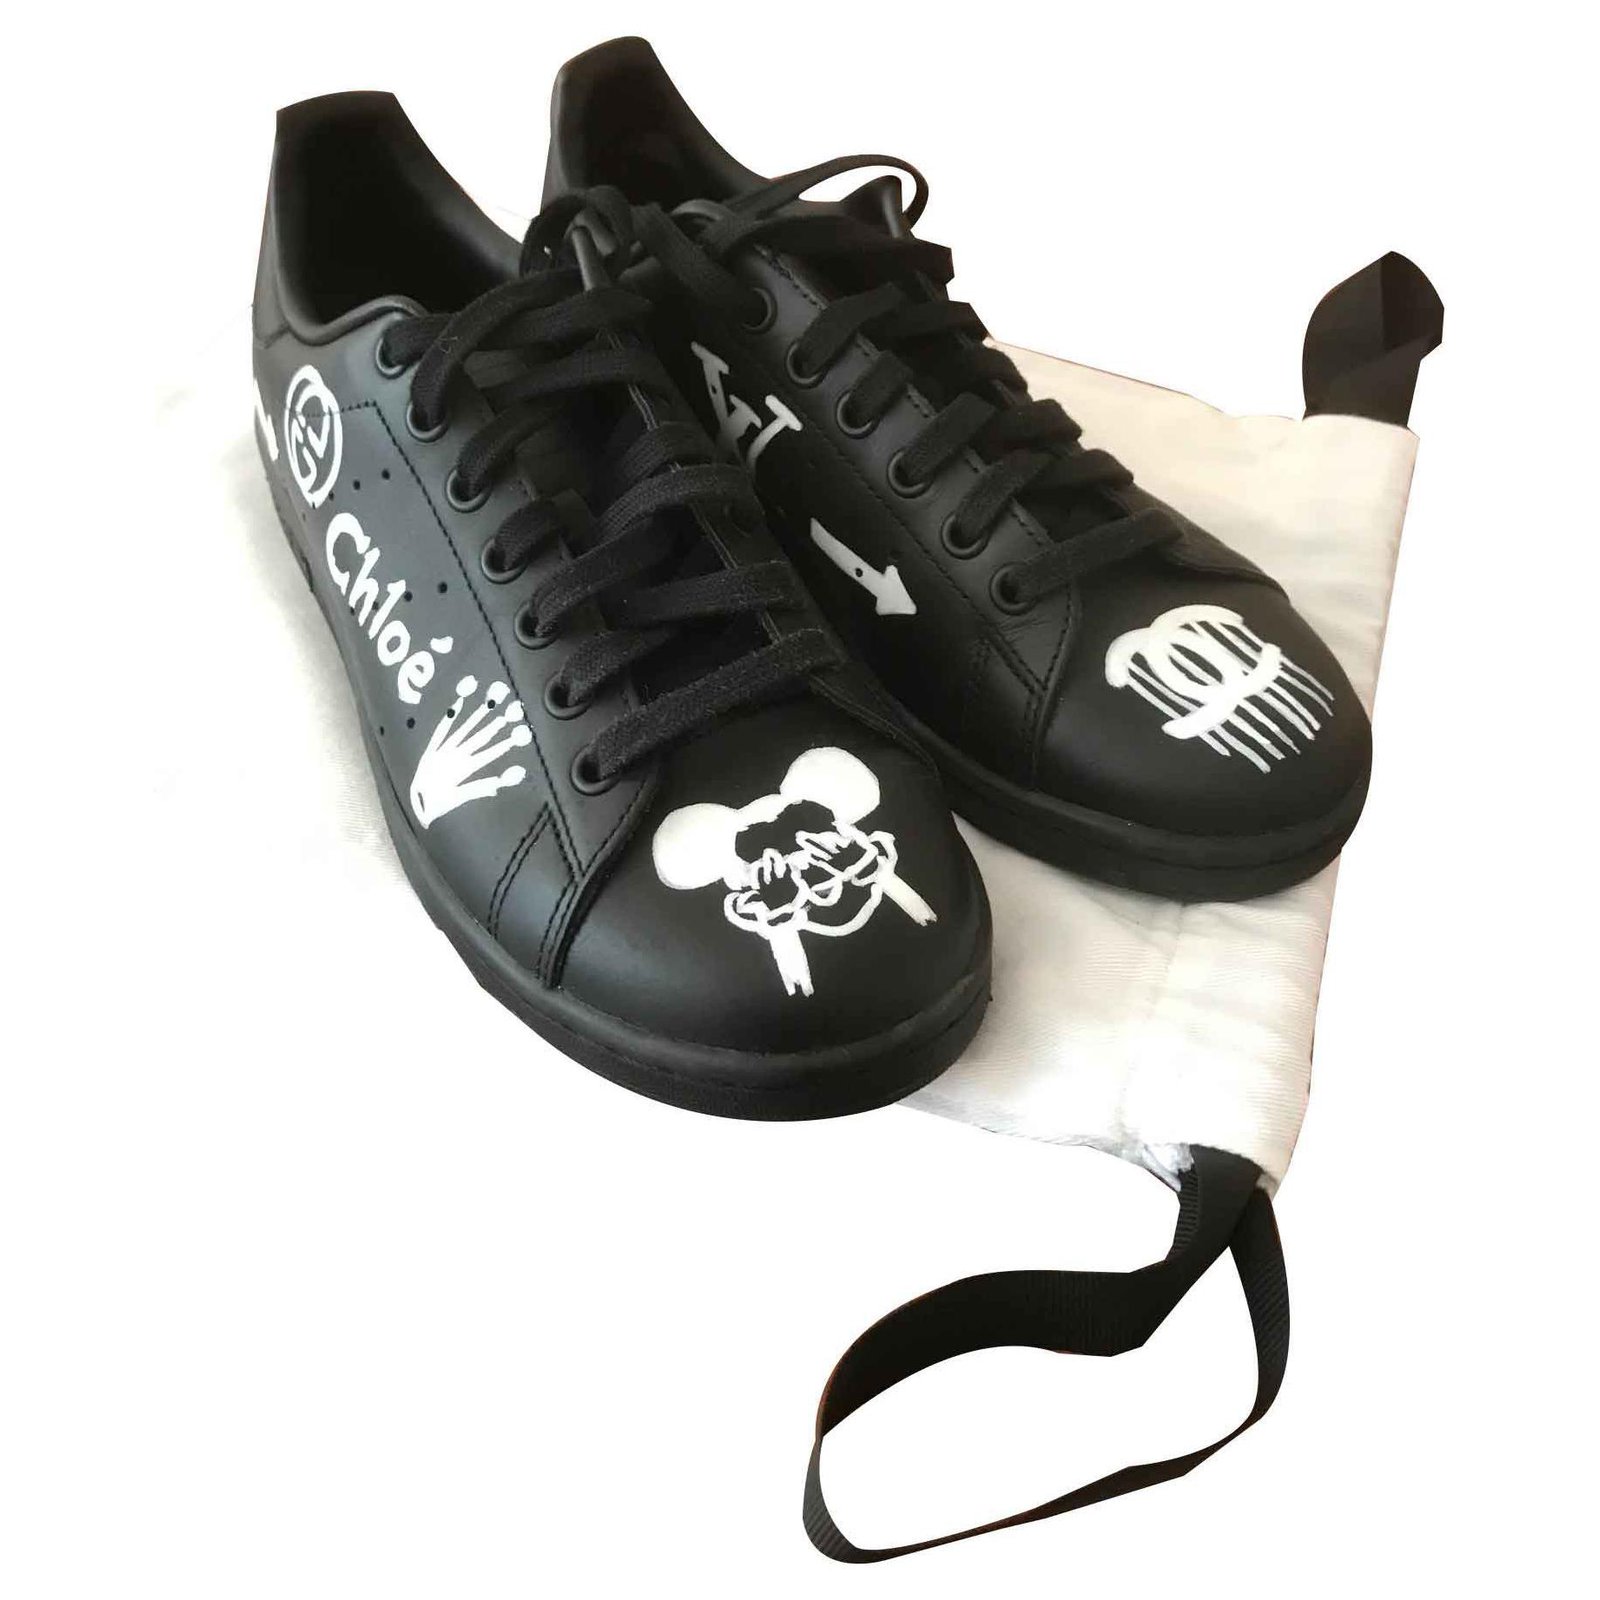 Adidas Stan Smith Customized by Michael 